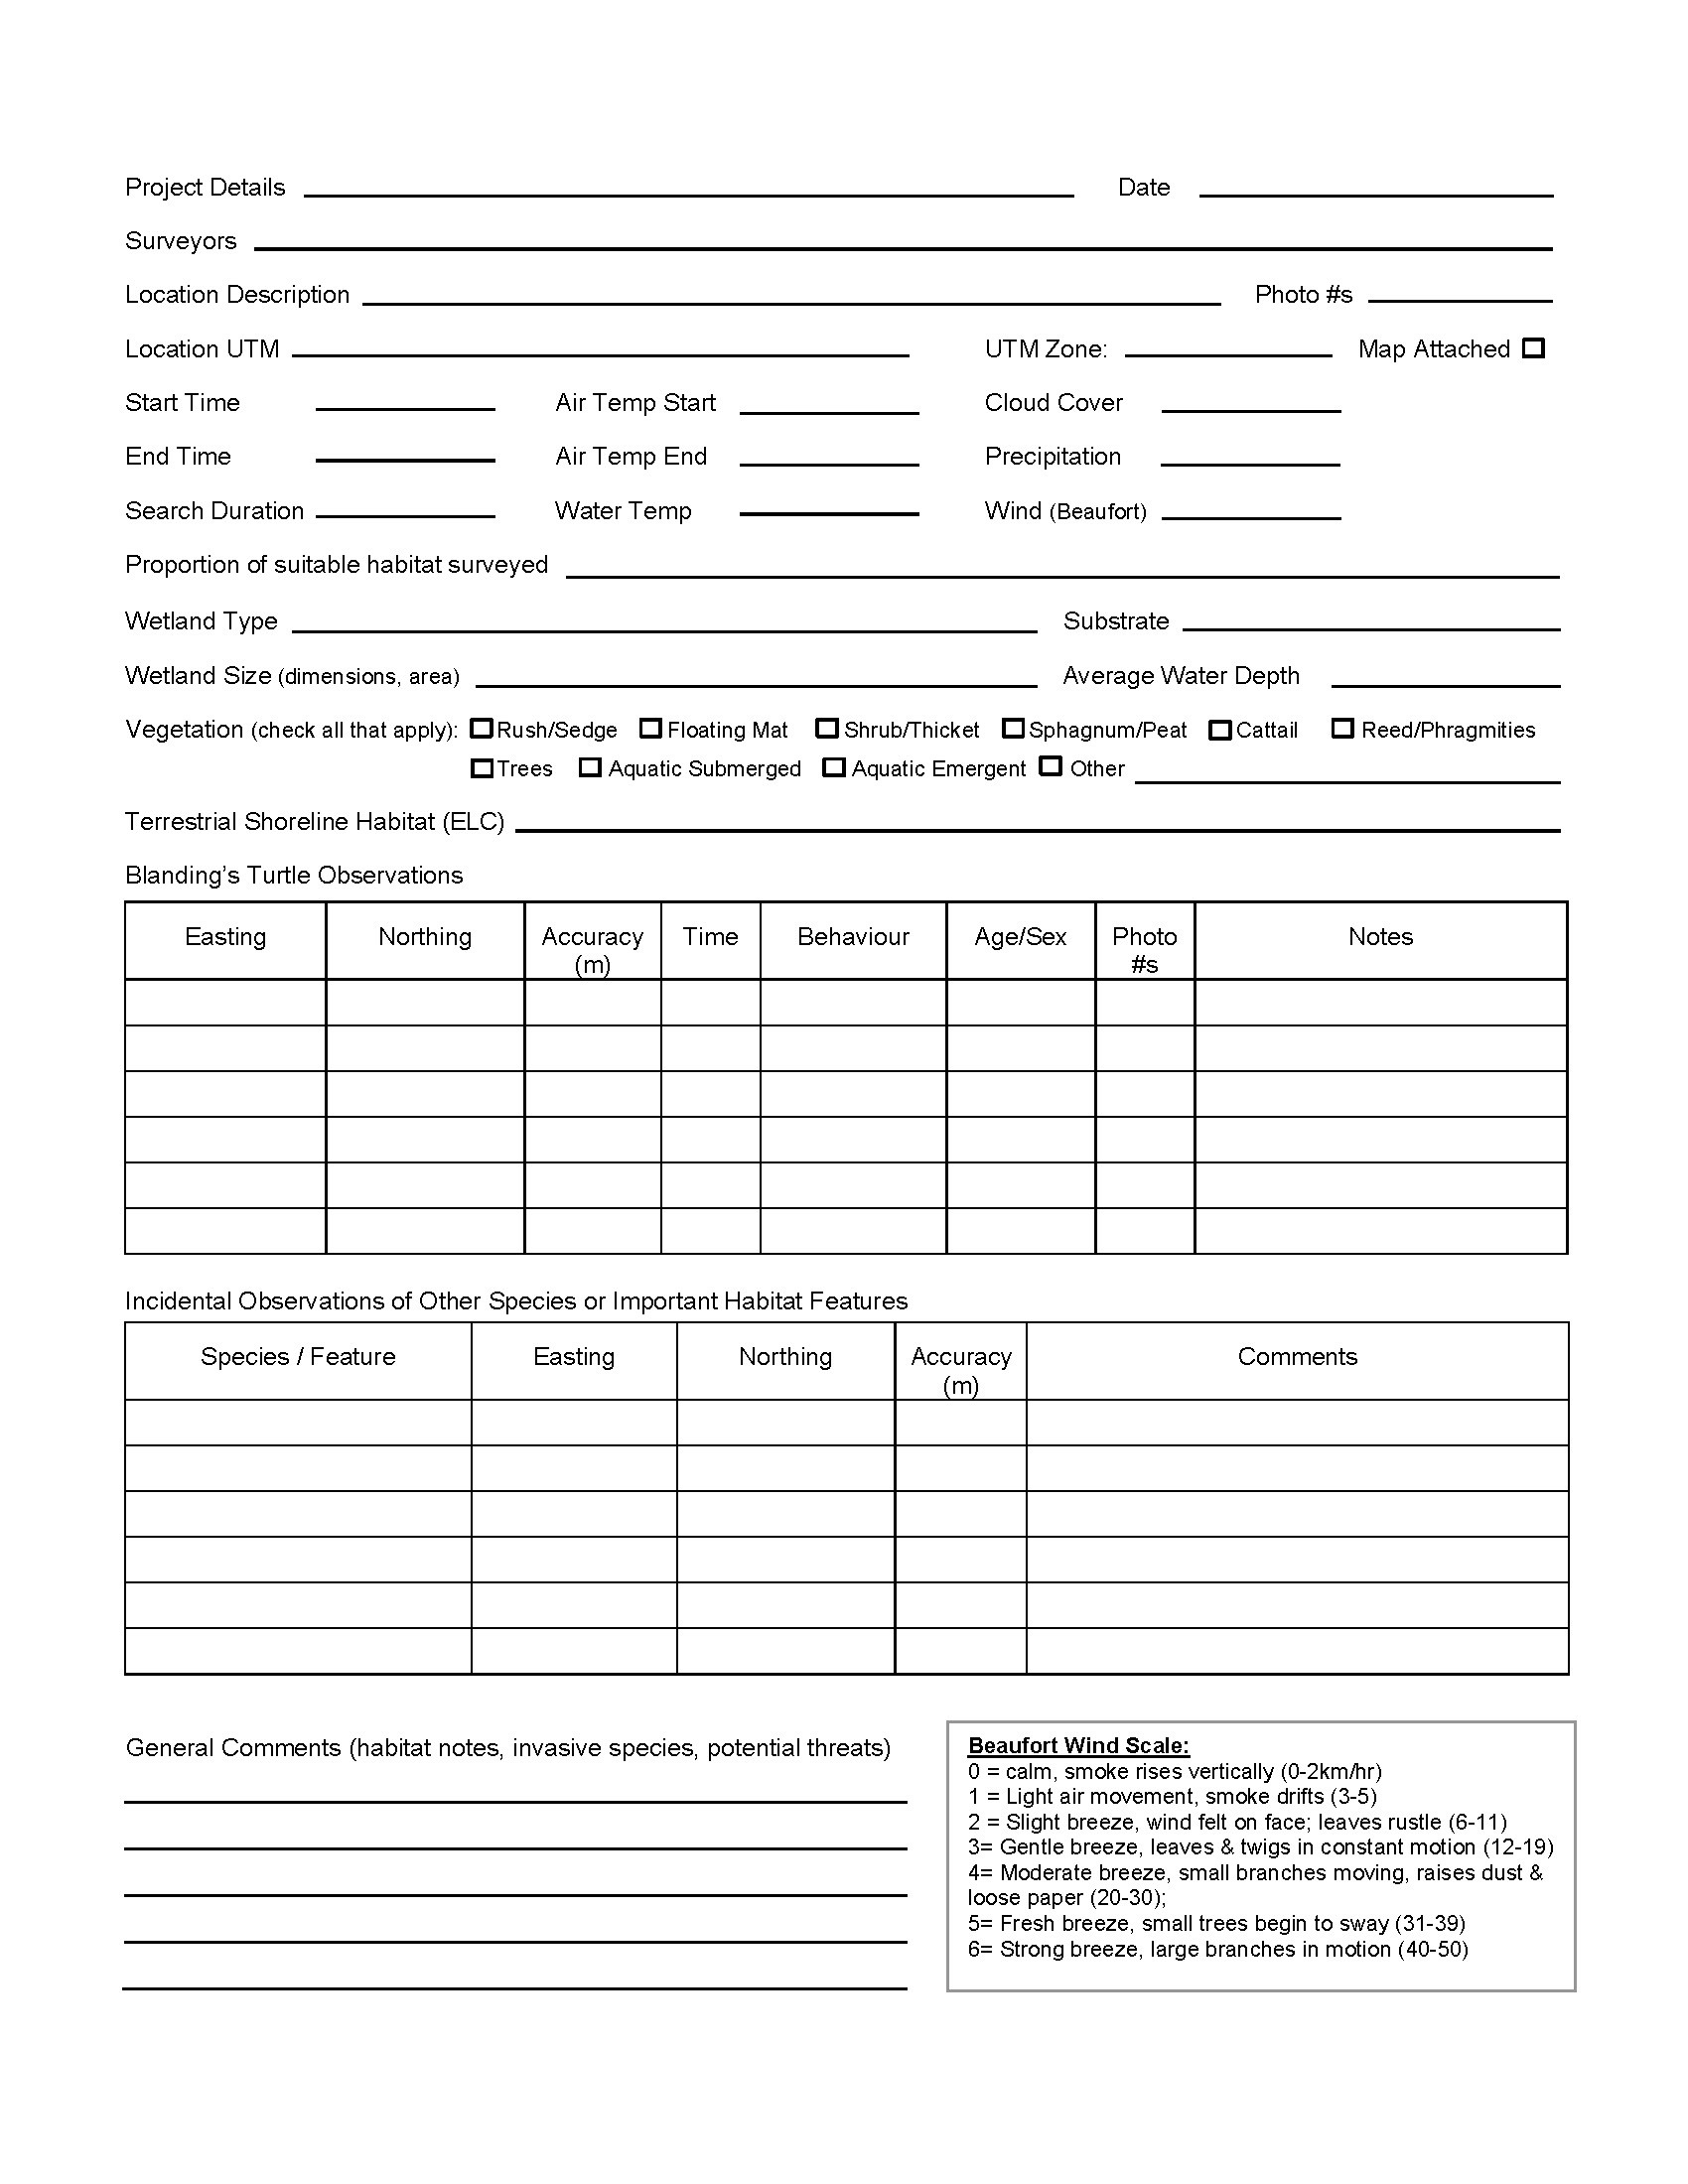 This is a sample image of Blanding’s Turtle Survey Form